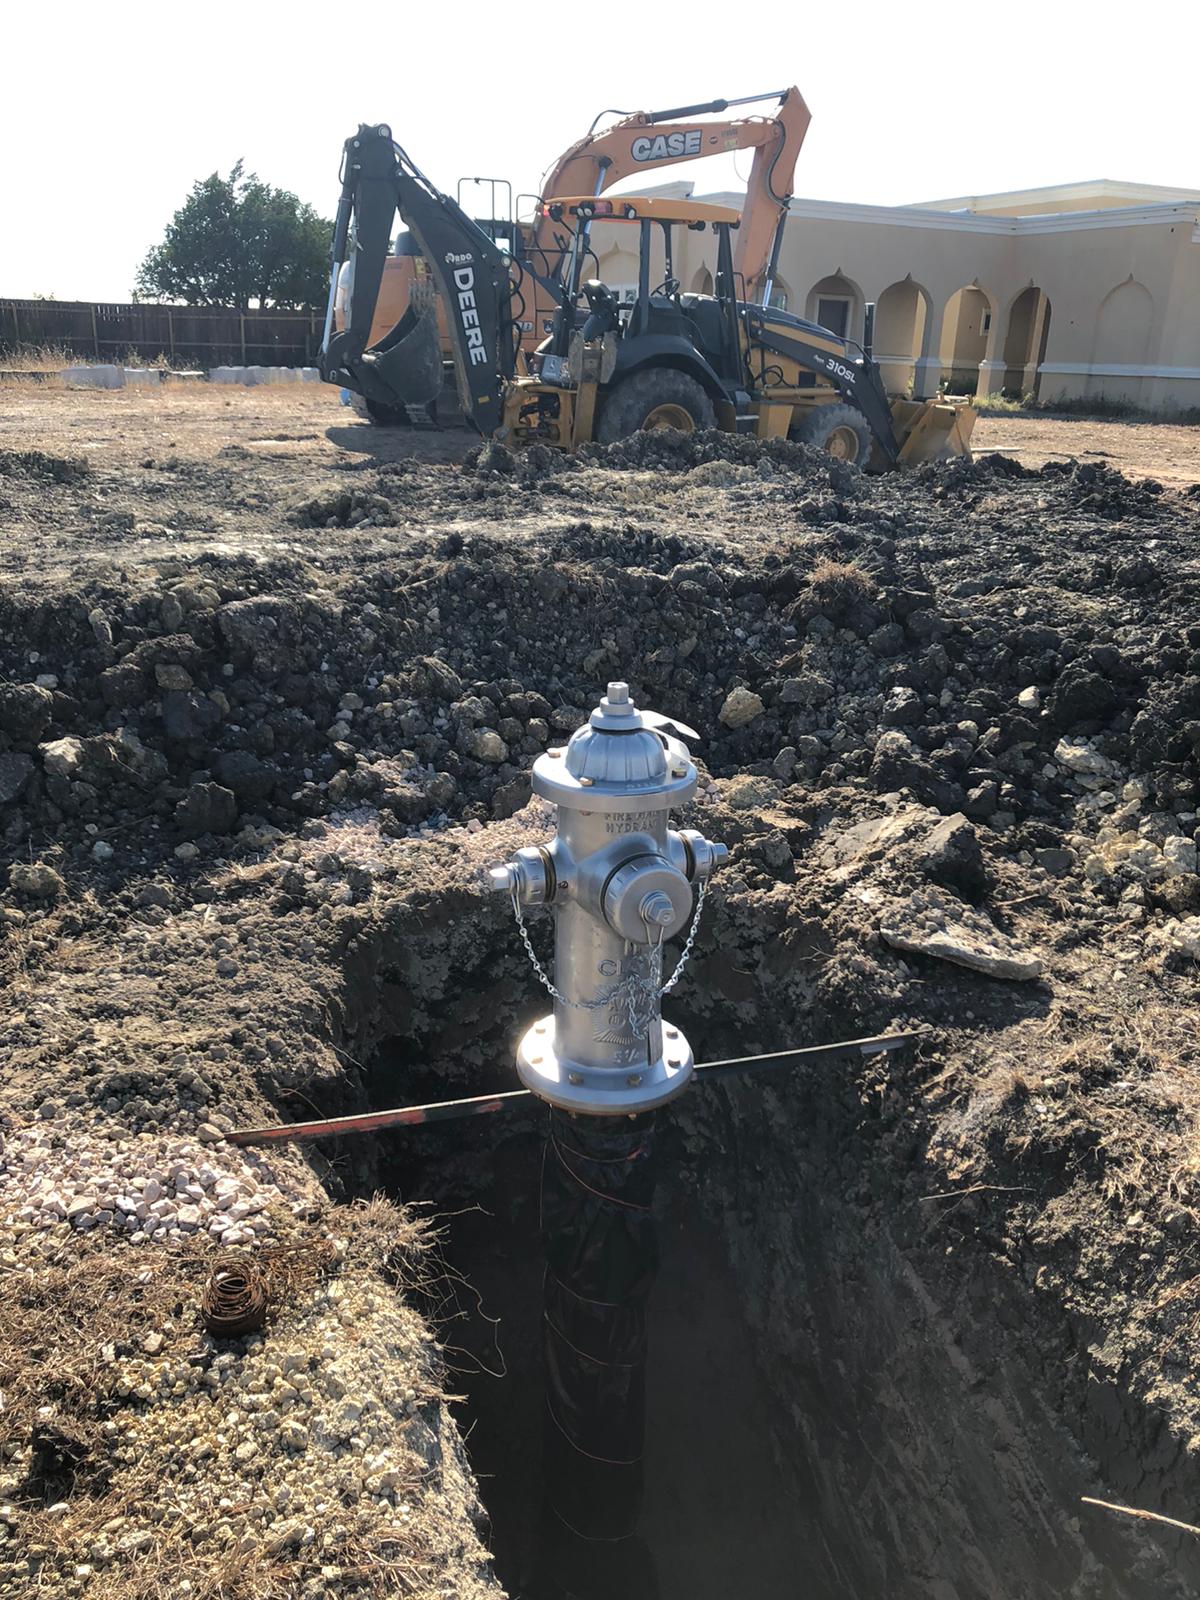 Nov 2019: Ongoing fireline and fire hydrant installation work